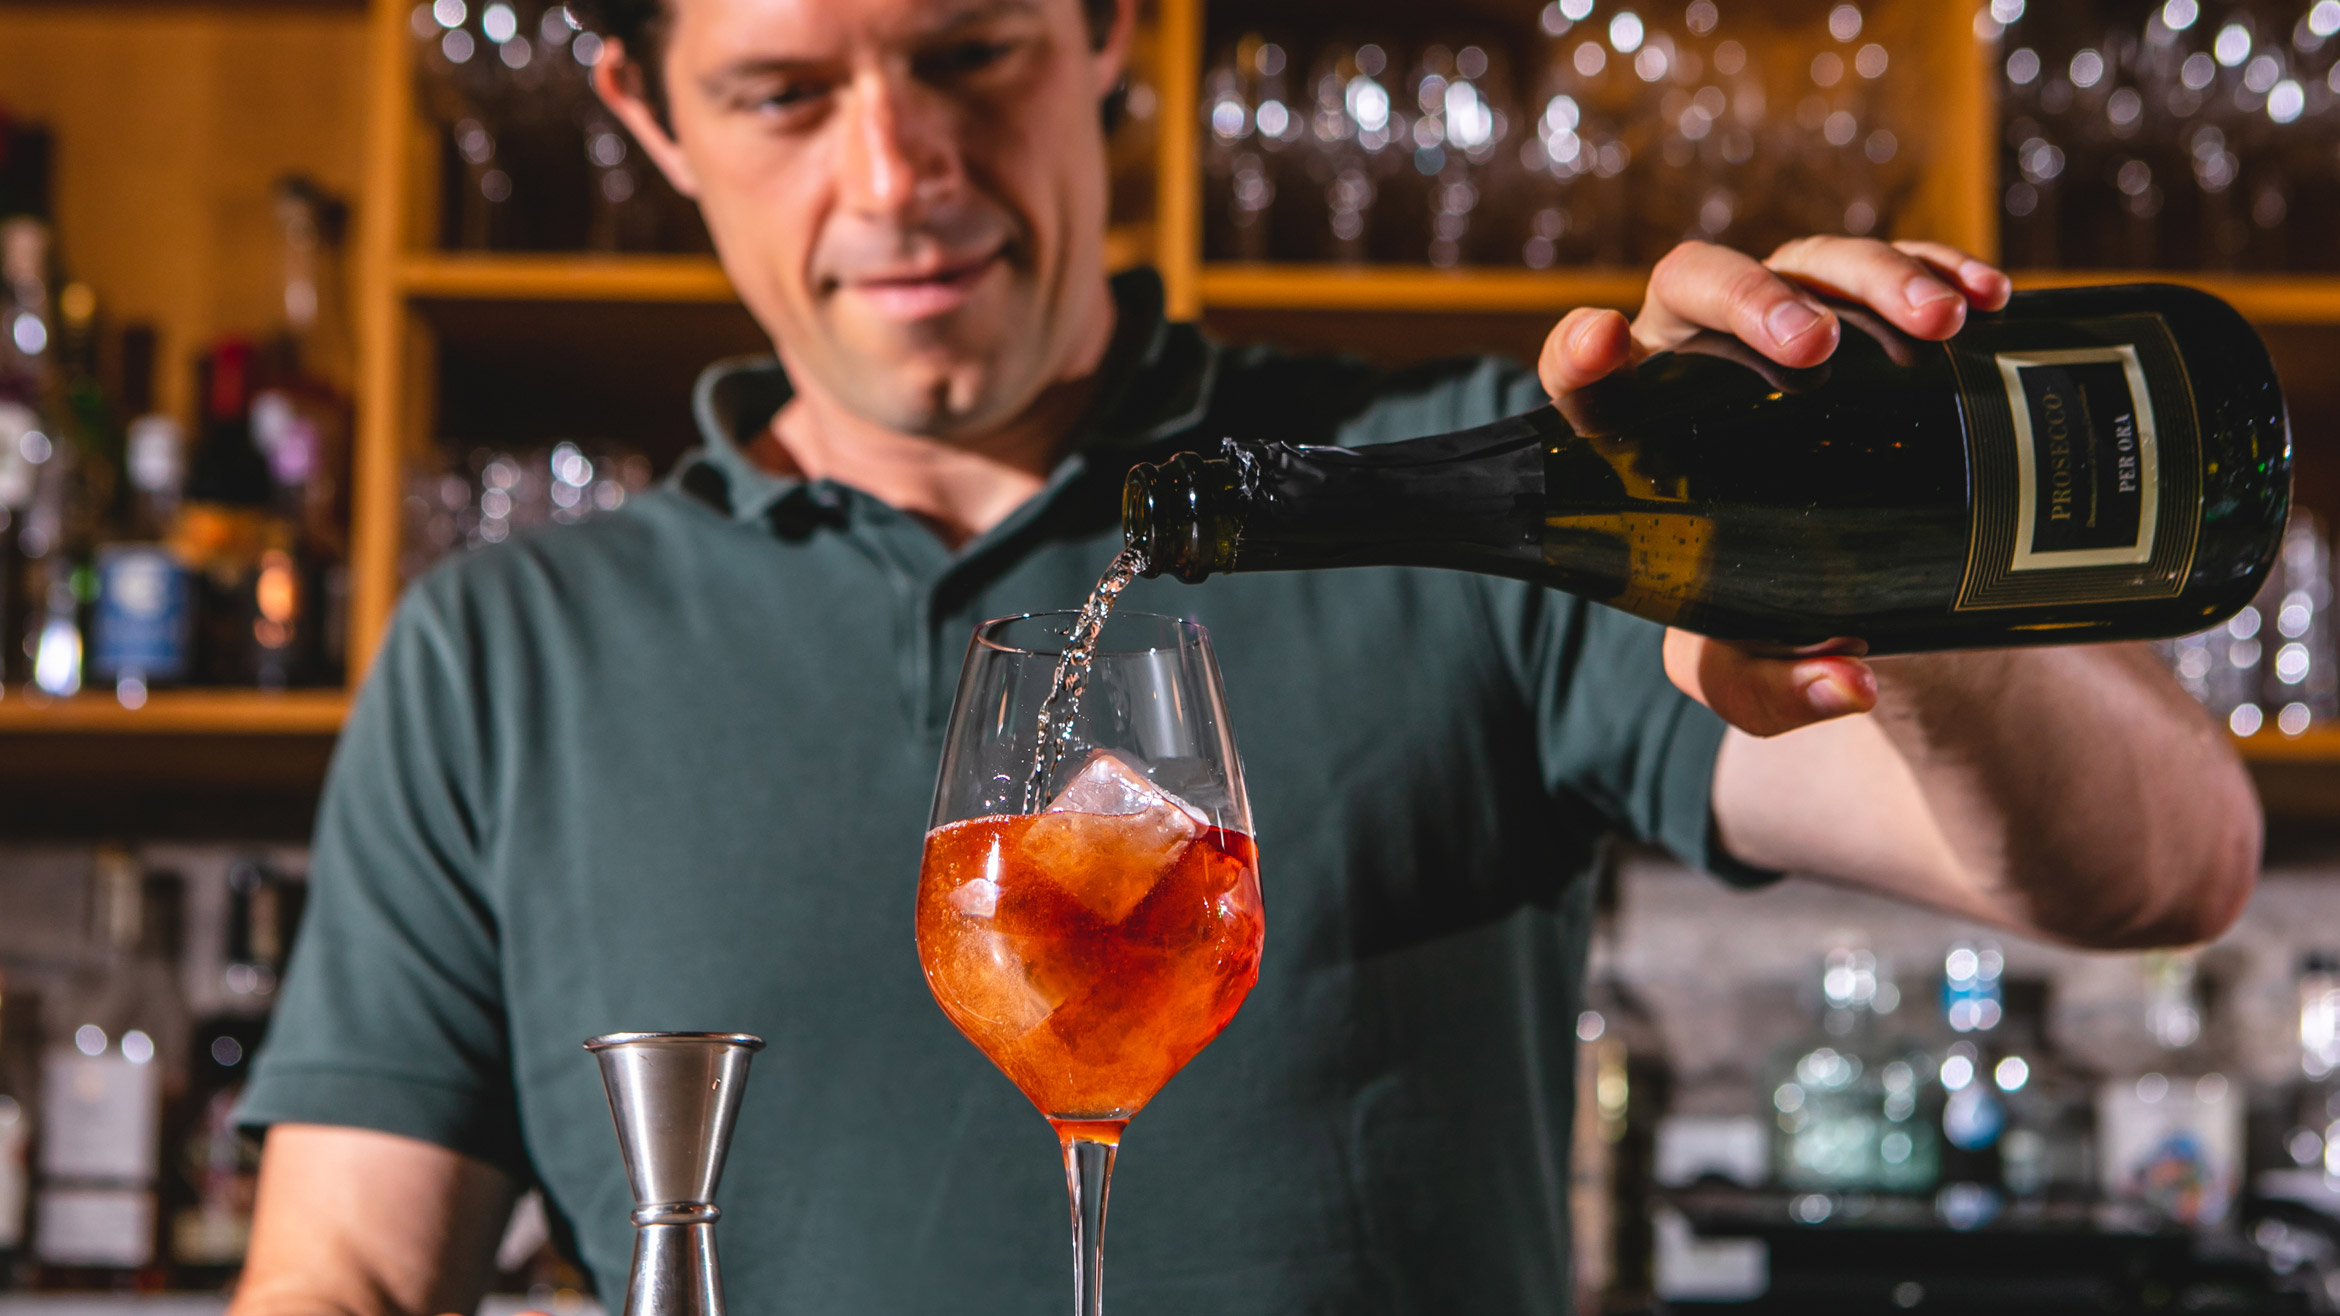 A man at a bar pours a bottle into a glass with a negroni-colored drink in it. 